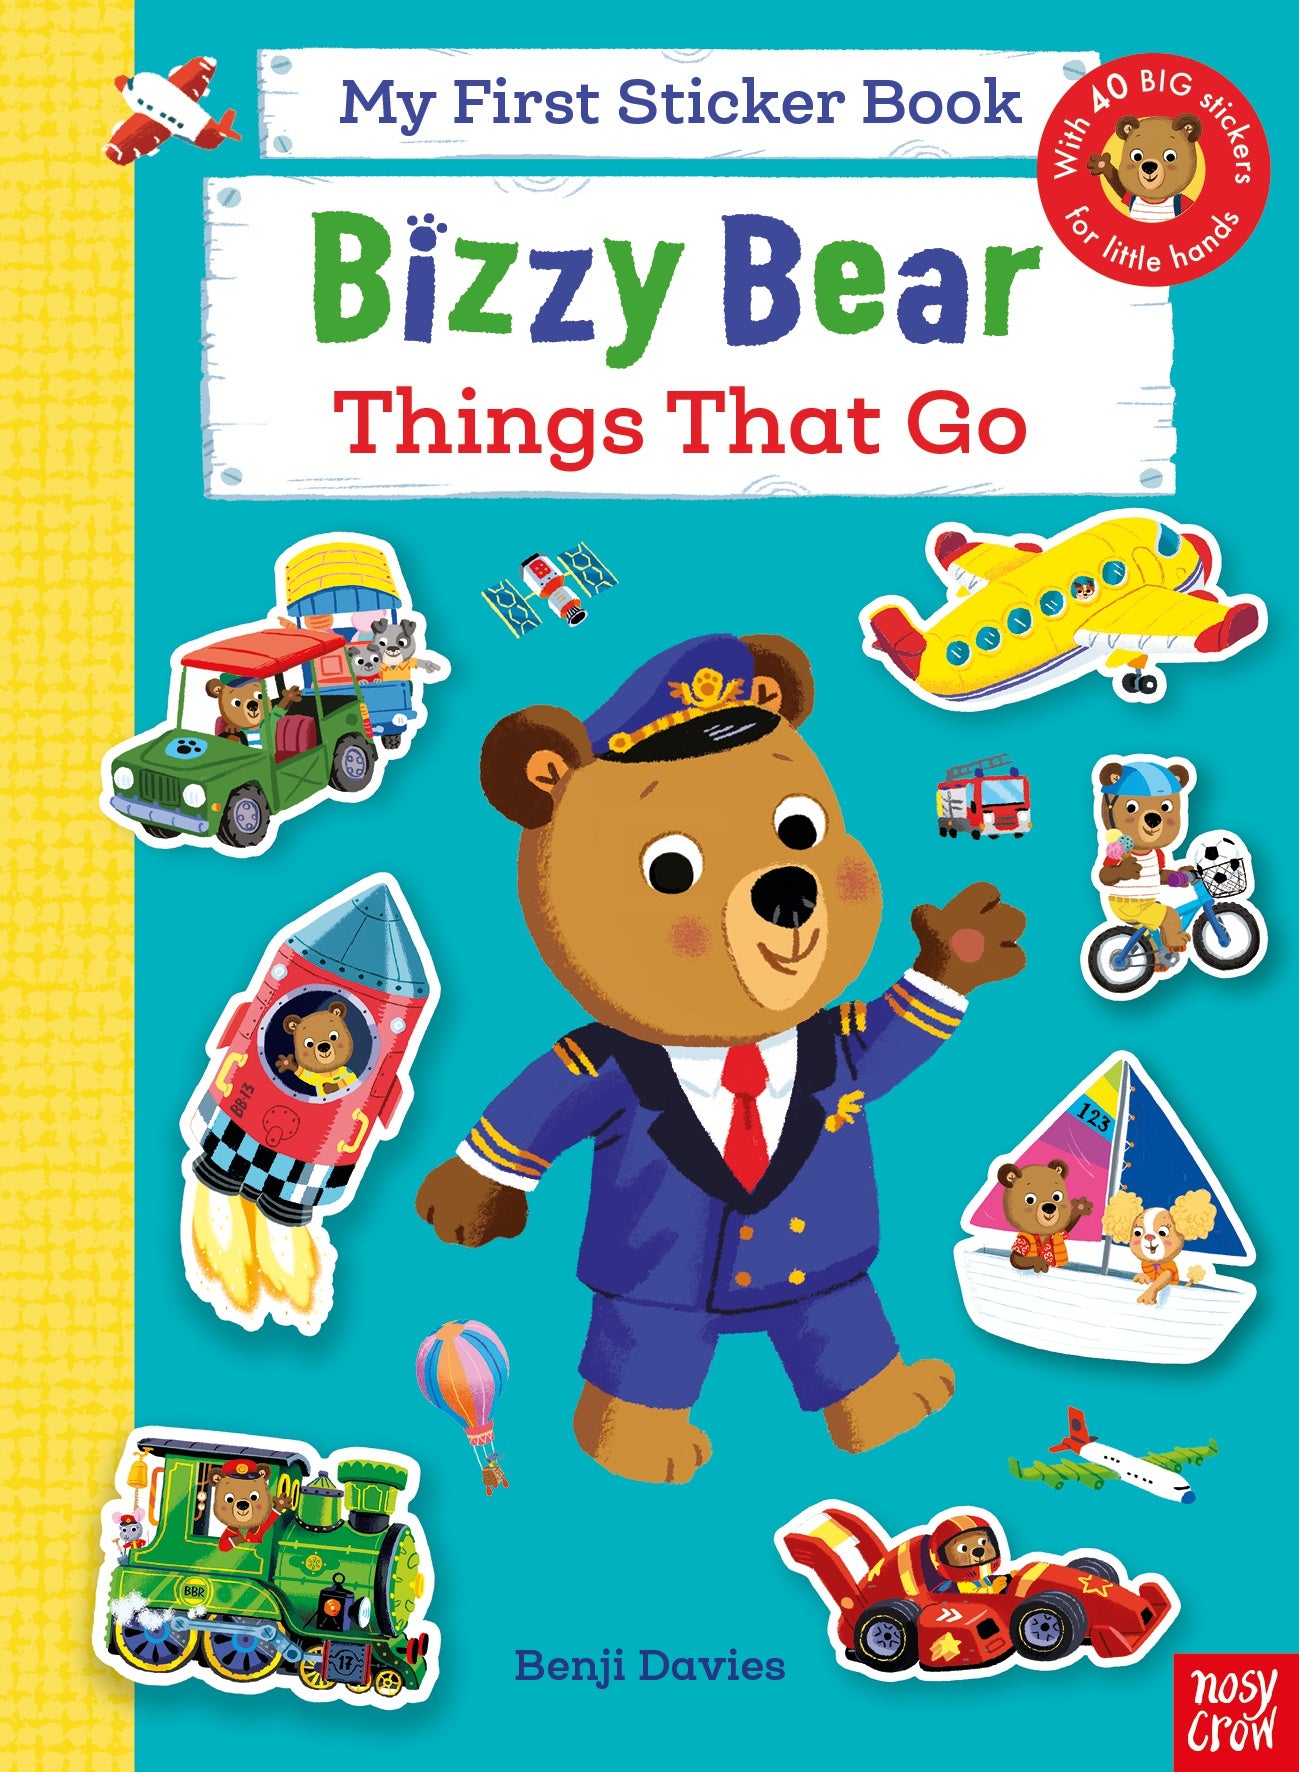 Bizzy Bear: My First Sticker Book - Things That Go